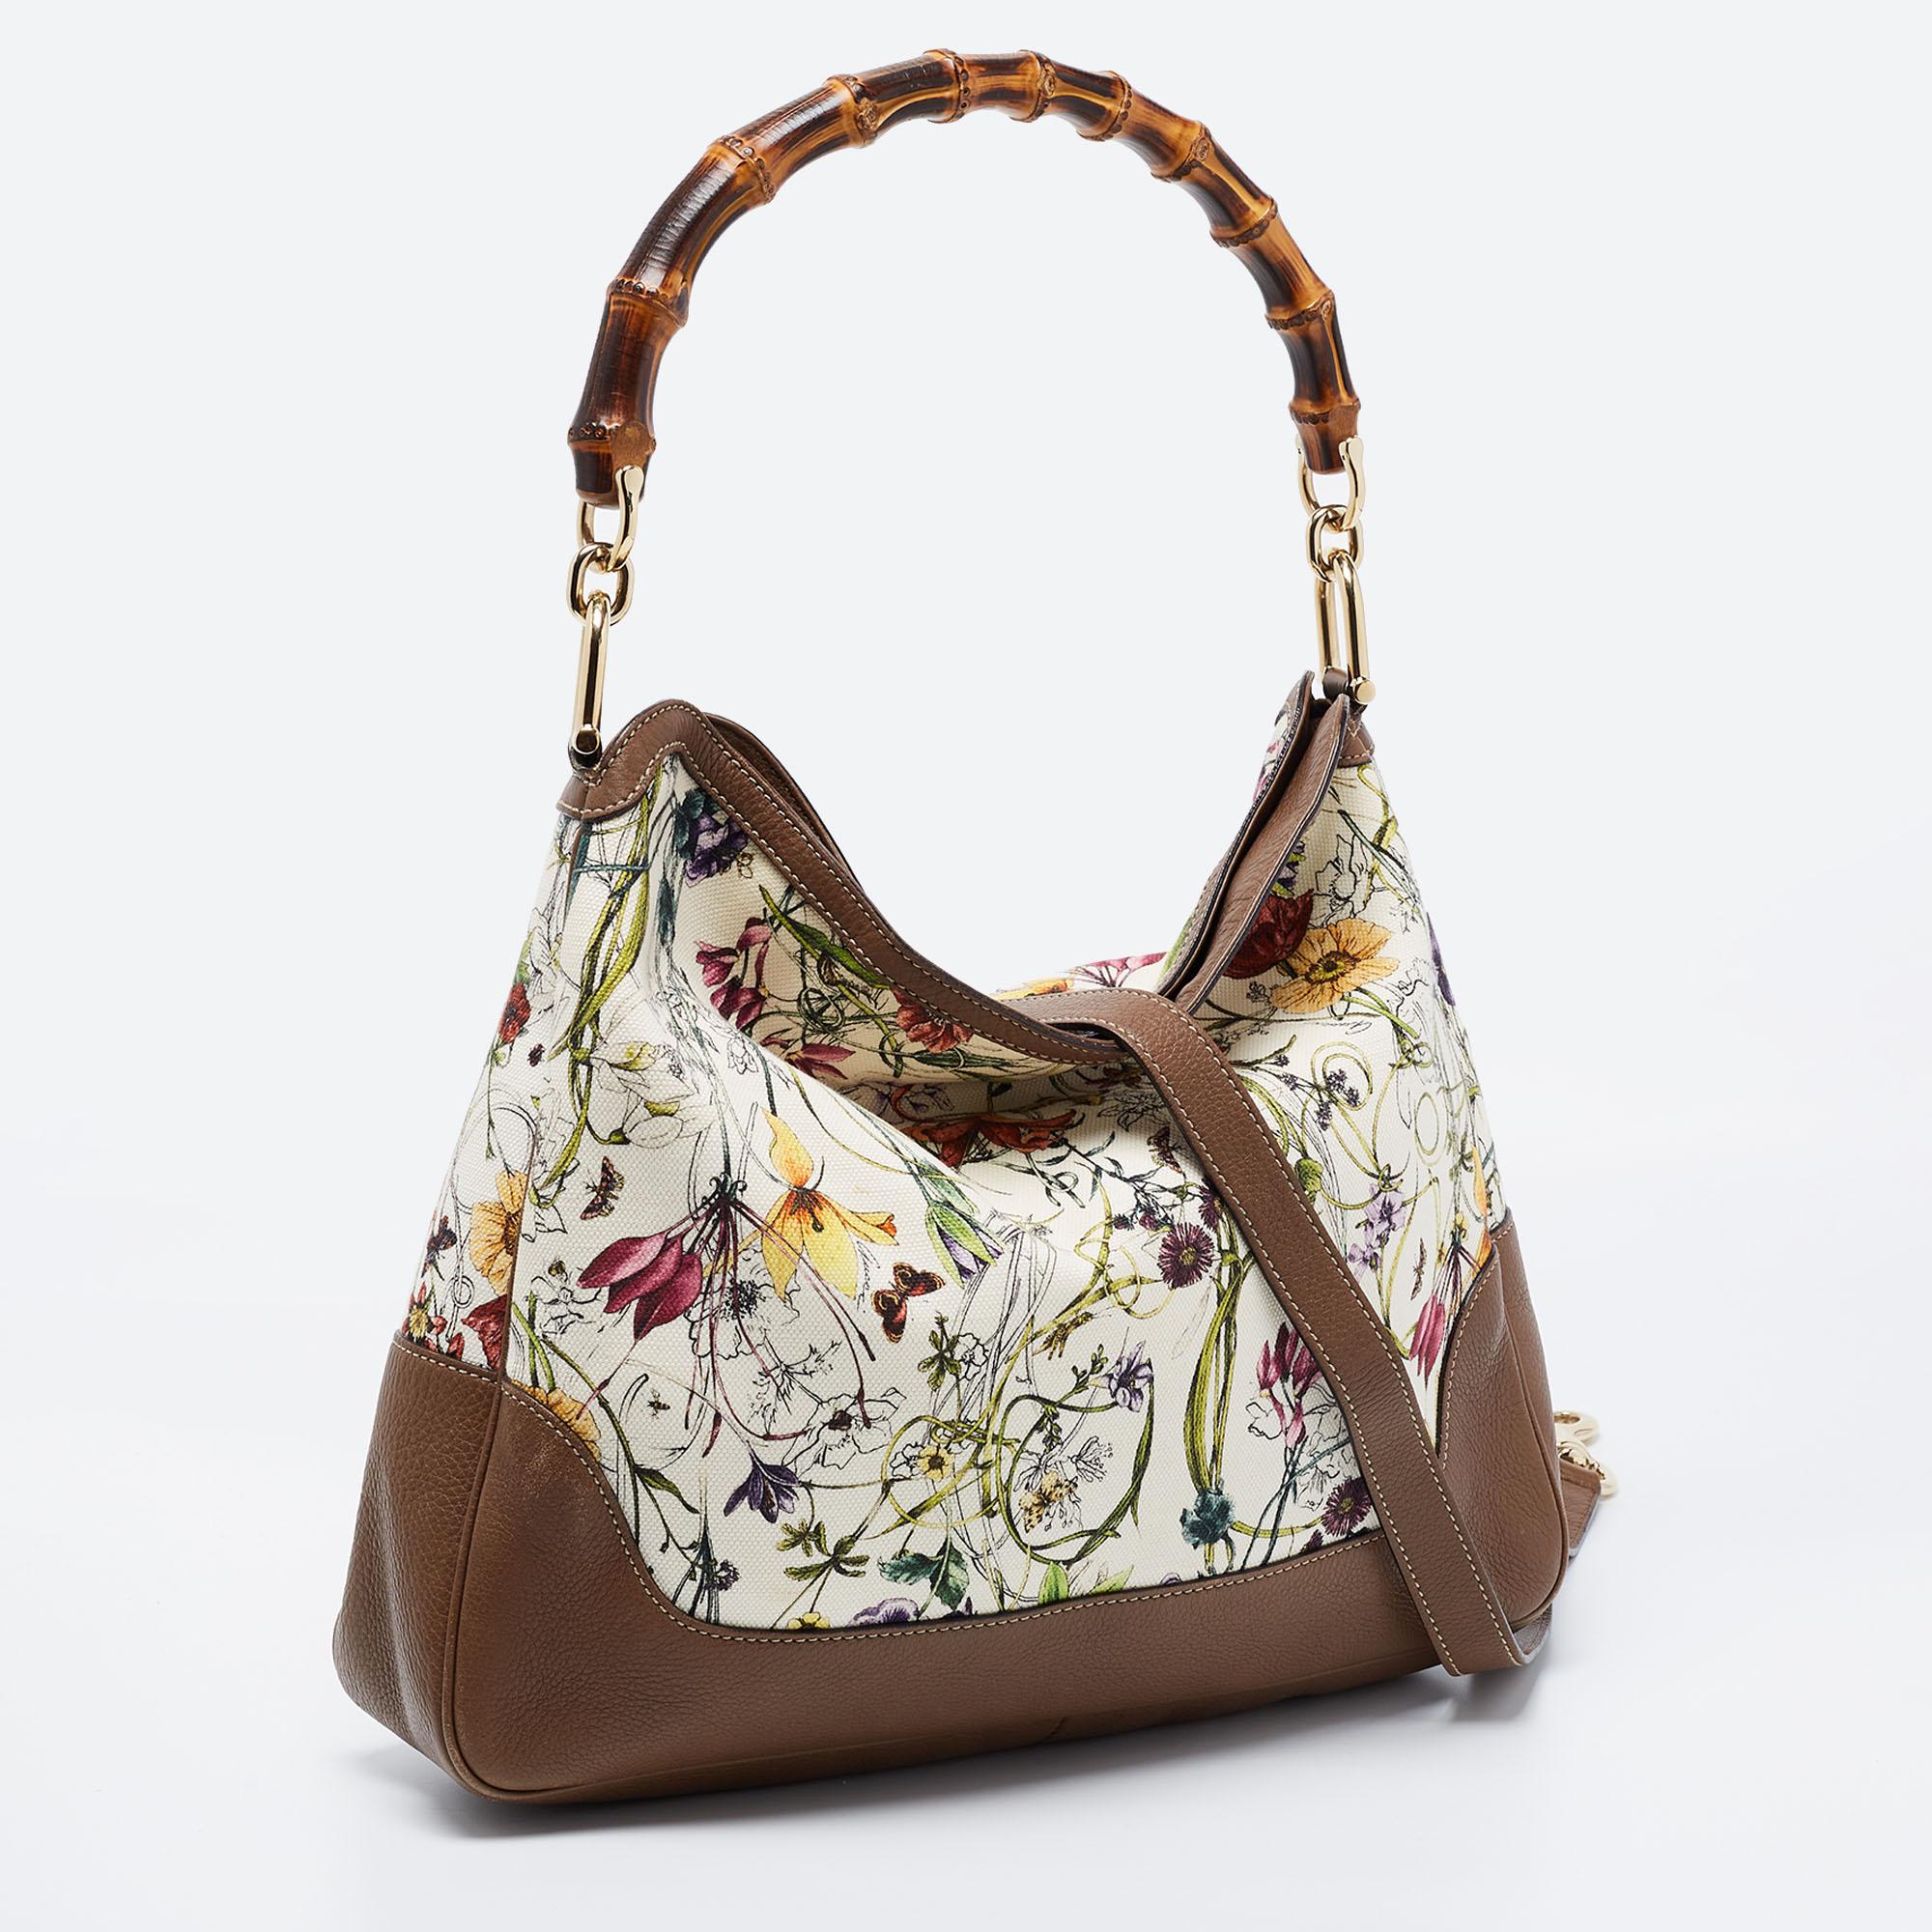 The eye-catching and enduring details of this Gucci bag make it a wise investment. Created from leather and beautiful floral canvas, the design gets a classic update with a bamboo handle at the top, and it is adorned with gold-tone accents. The